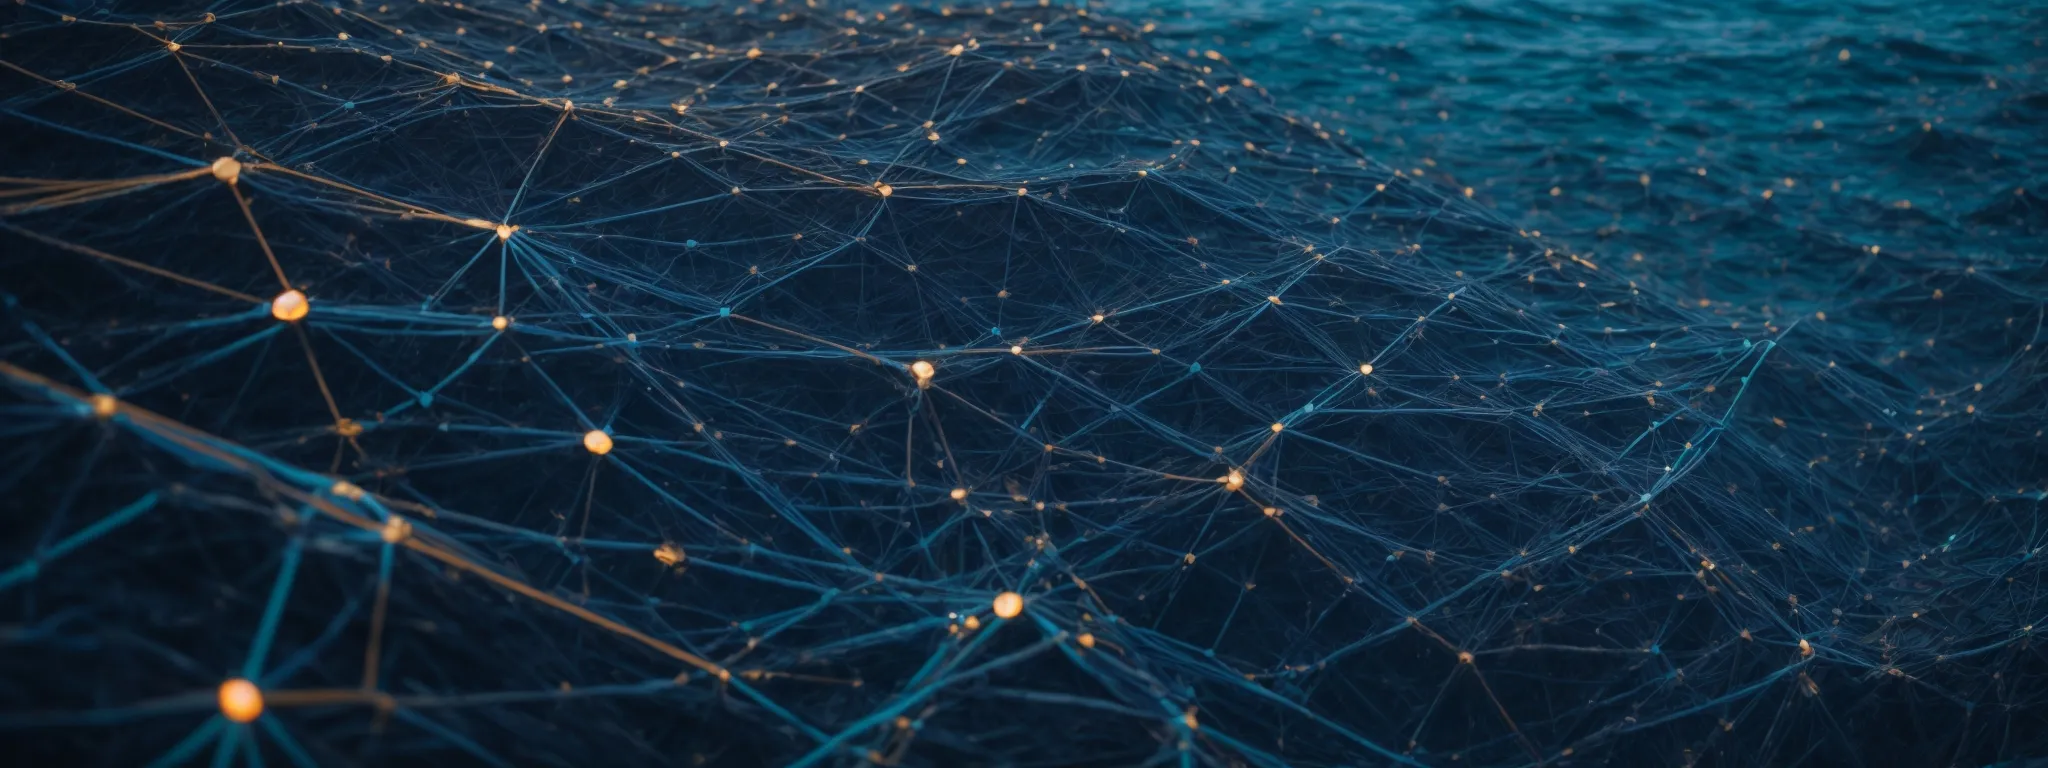 a digital ocean with a vast network of interconnected nodes and data streams, symbolizing google's complex ranking algorithms.